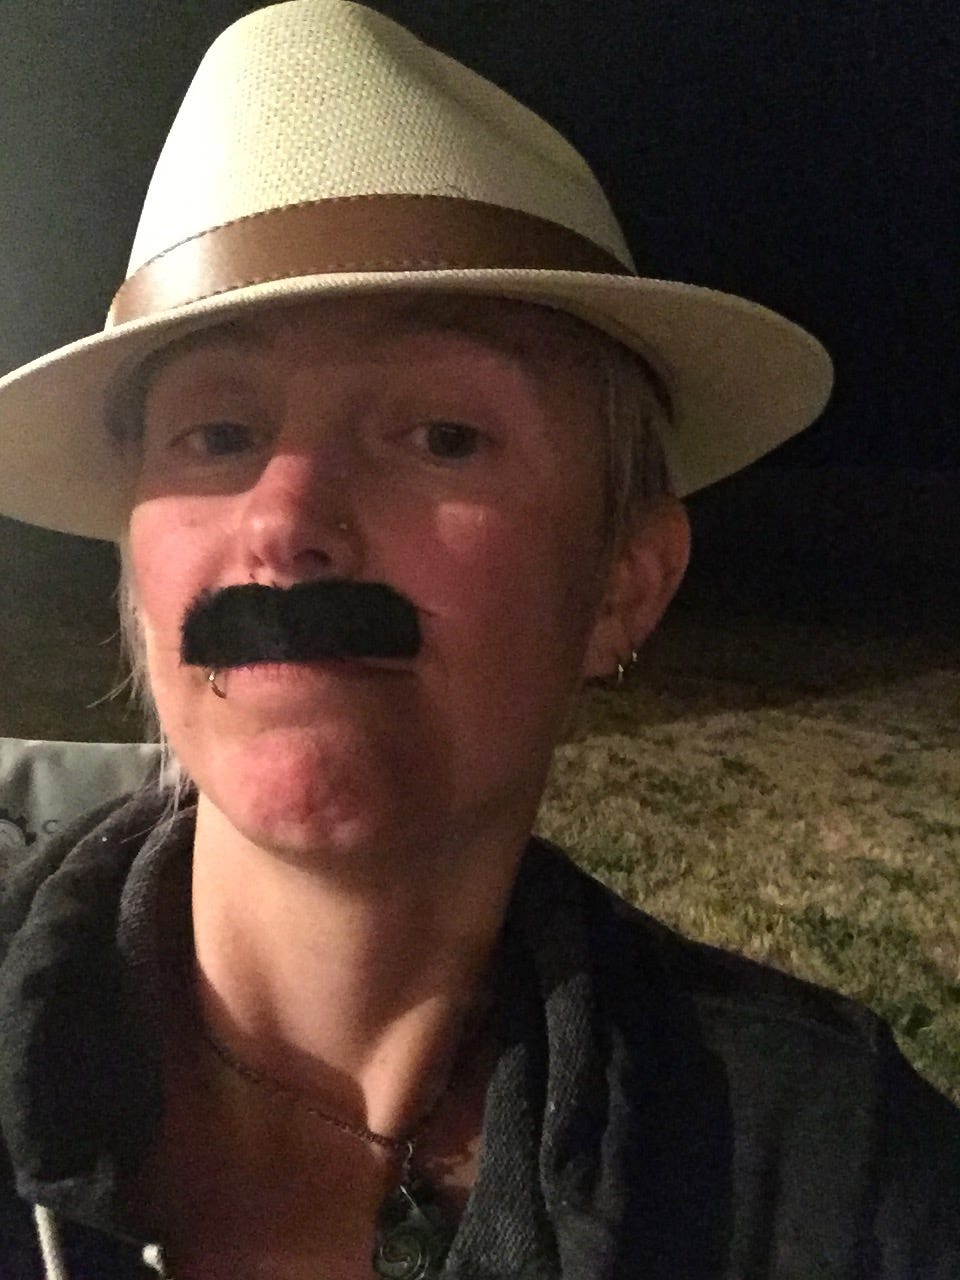 Jessie wearing a straw hat and fake mustache. She is almost certainly whisky-tipsy in this photo.